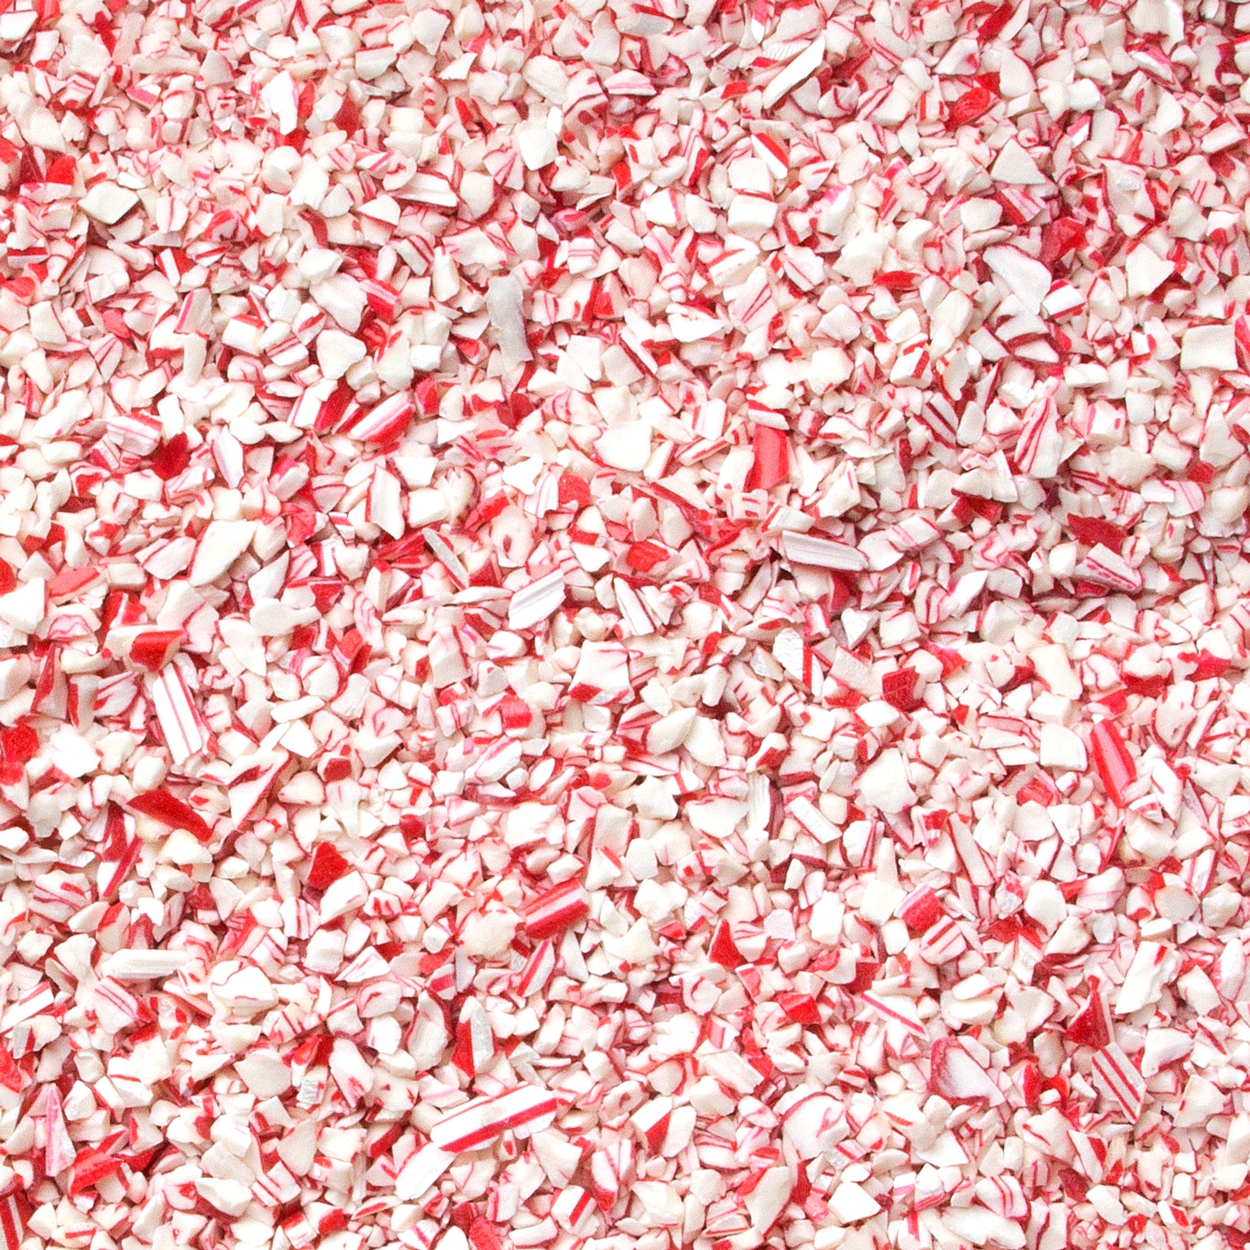 Crushed Red And White Peppermint Candy • Cooking And Baking Supplies • Oh Nuts® 